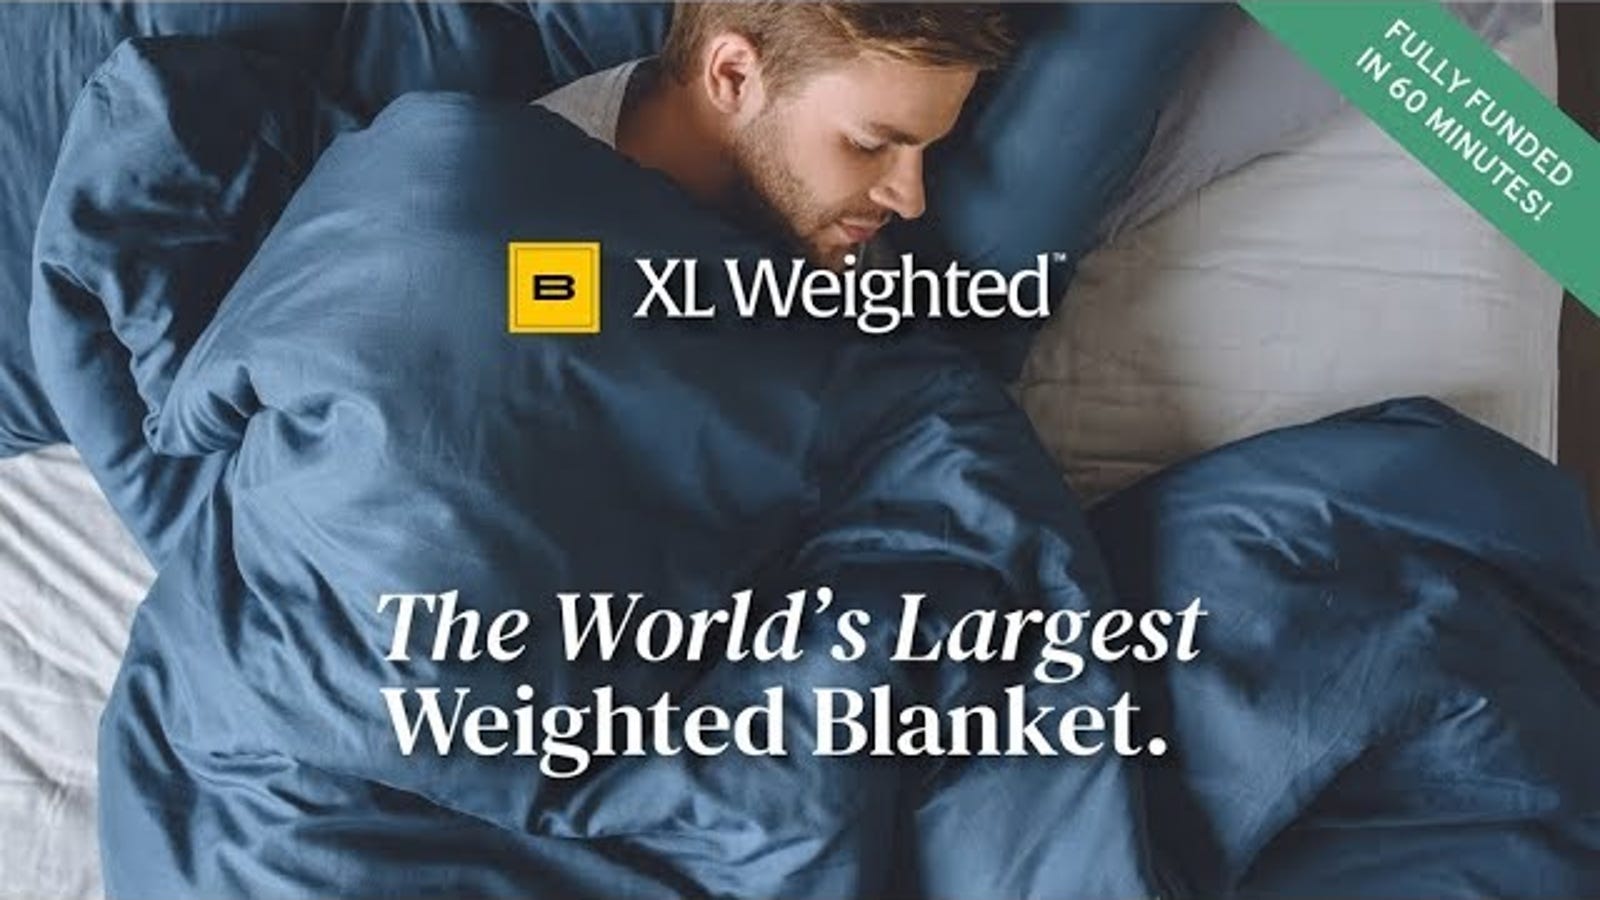 Big Blanket Co. Now Makes a Comically Large Weighted Blanket